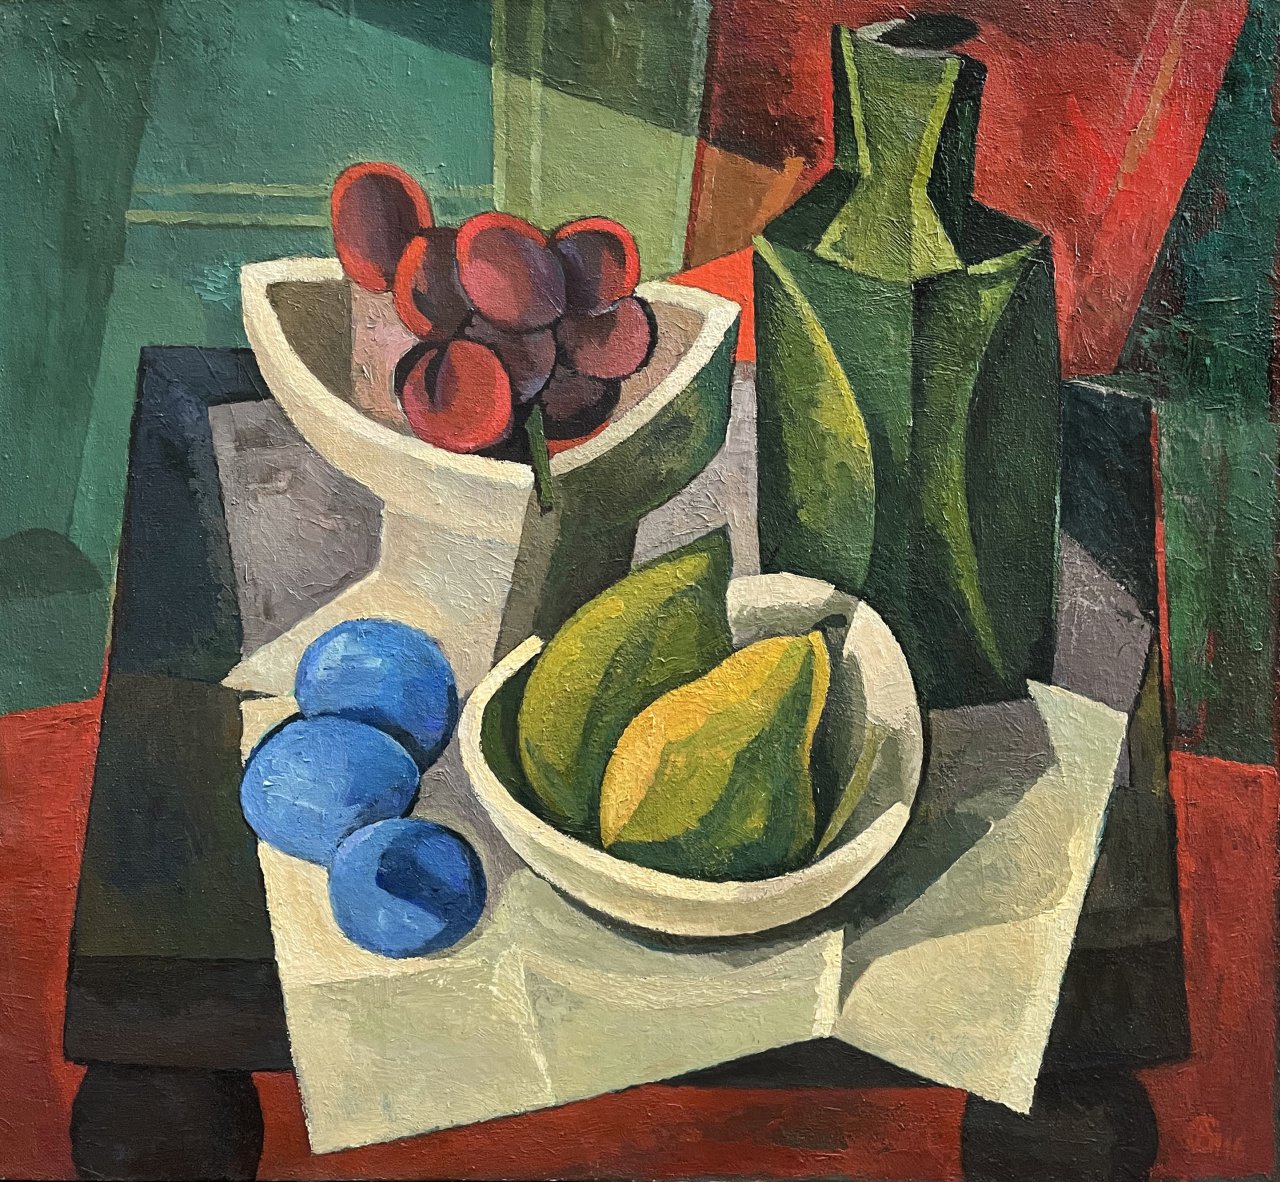 Art Painting: Still Life with Fruits